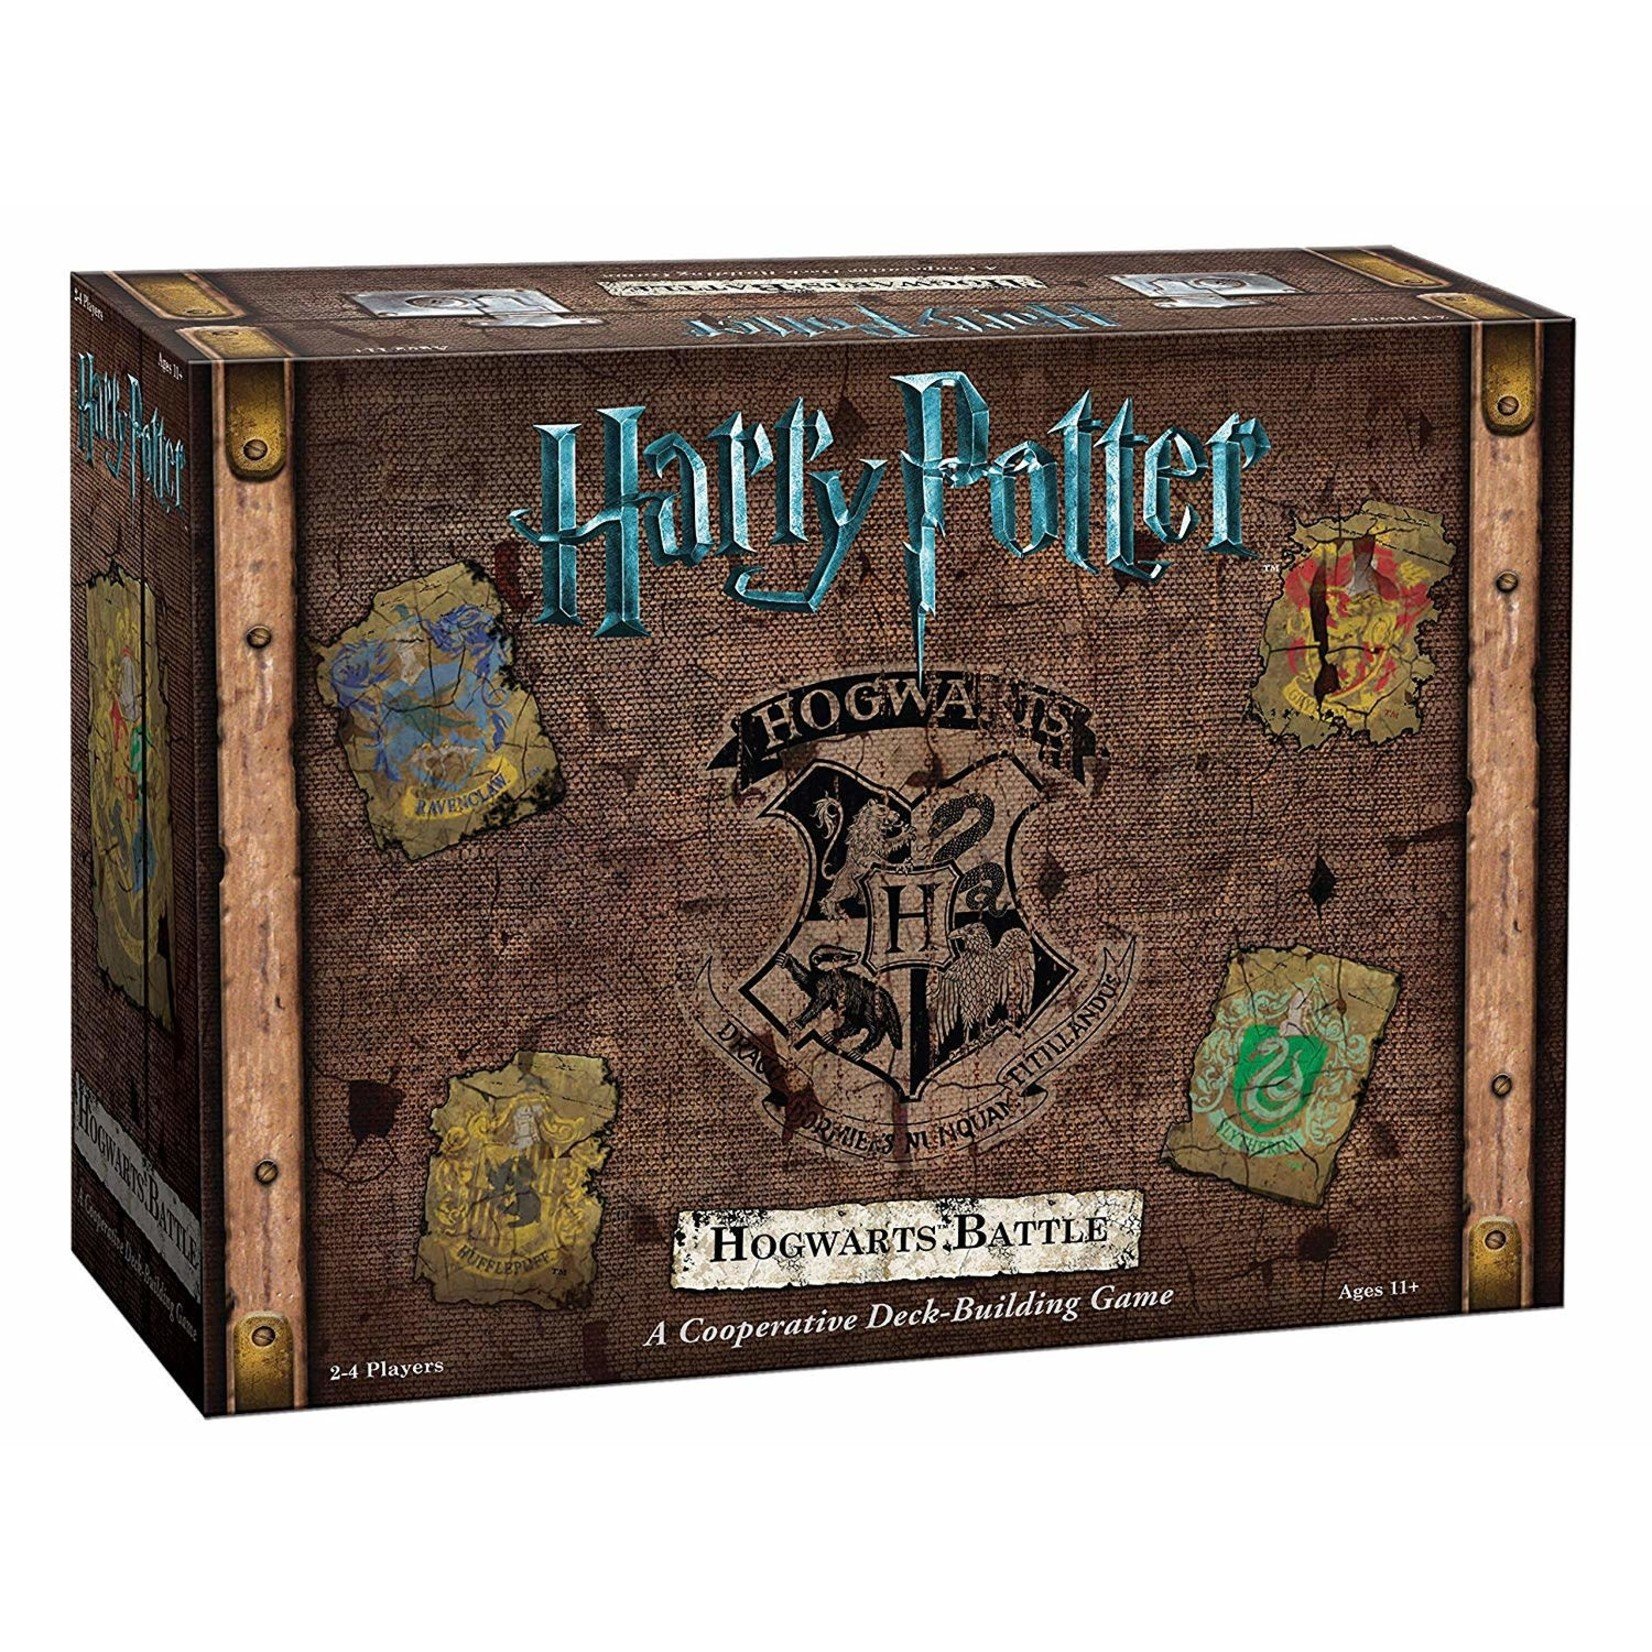 USAopoly Harry Potter Hogwarts Battle Cooperative Deck Building Card Game